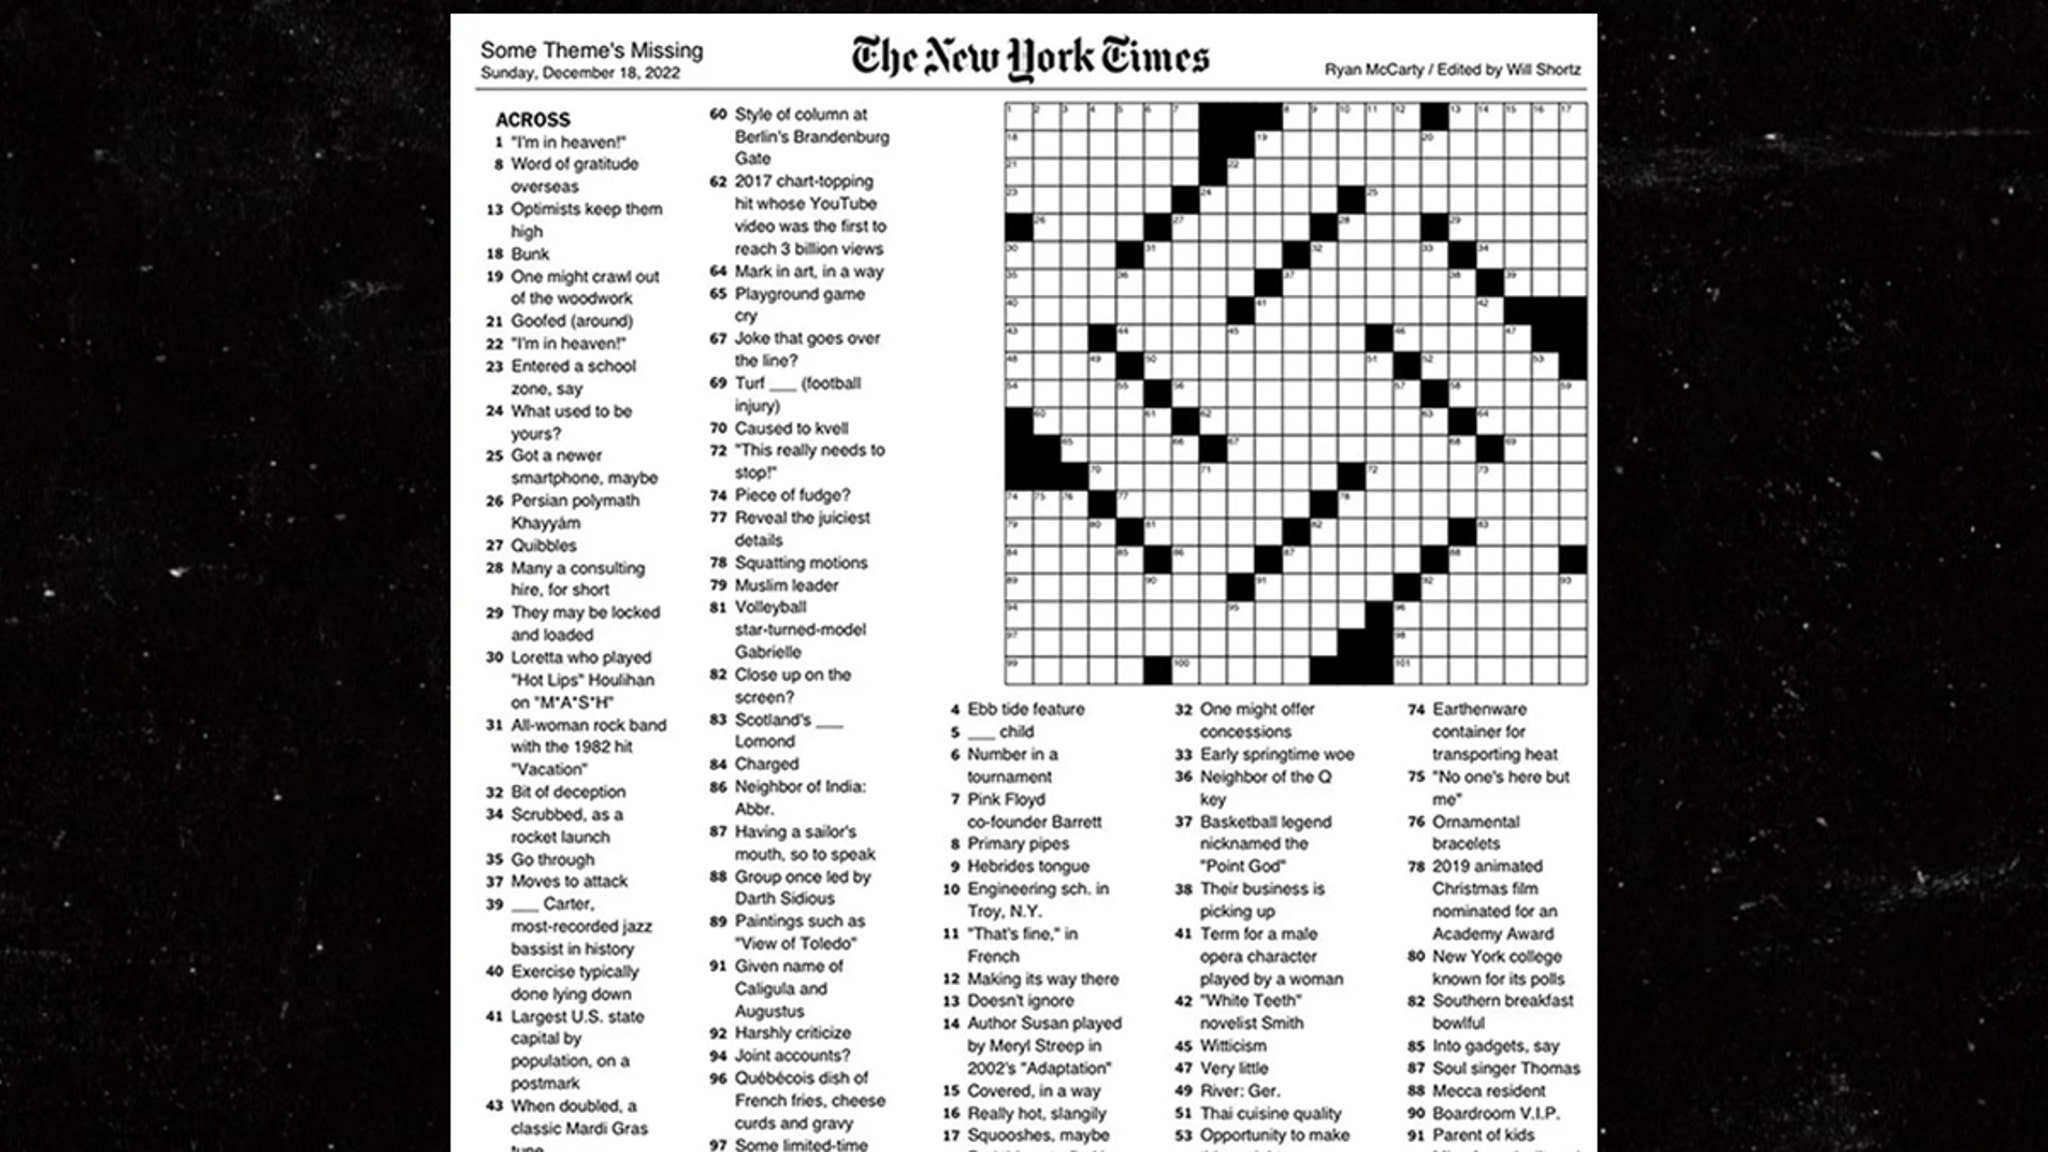 New York Times Dragged After Crossword s Swastika Shape During Hanukkah